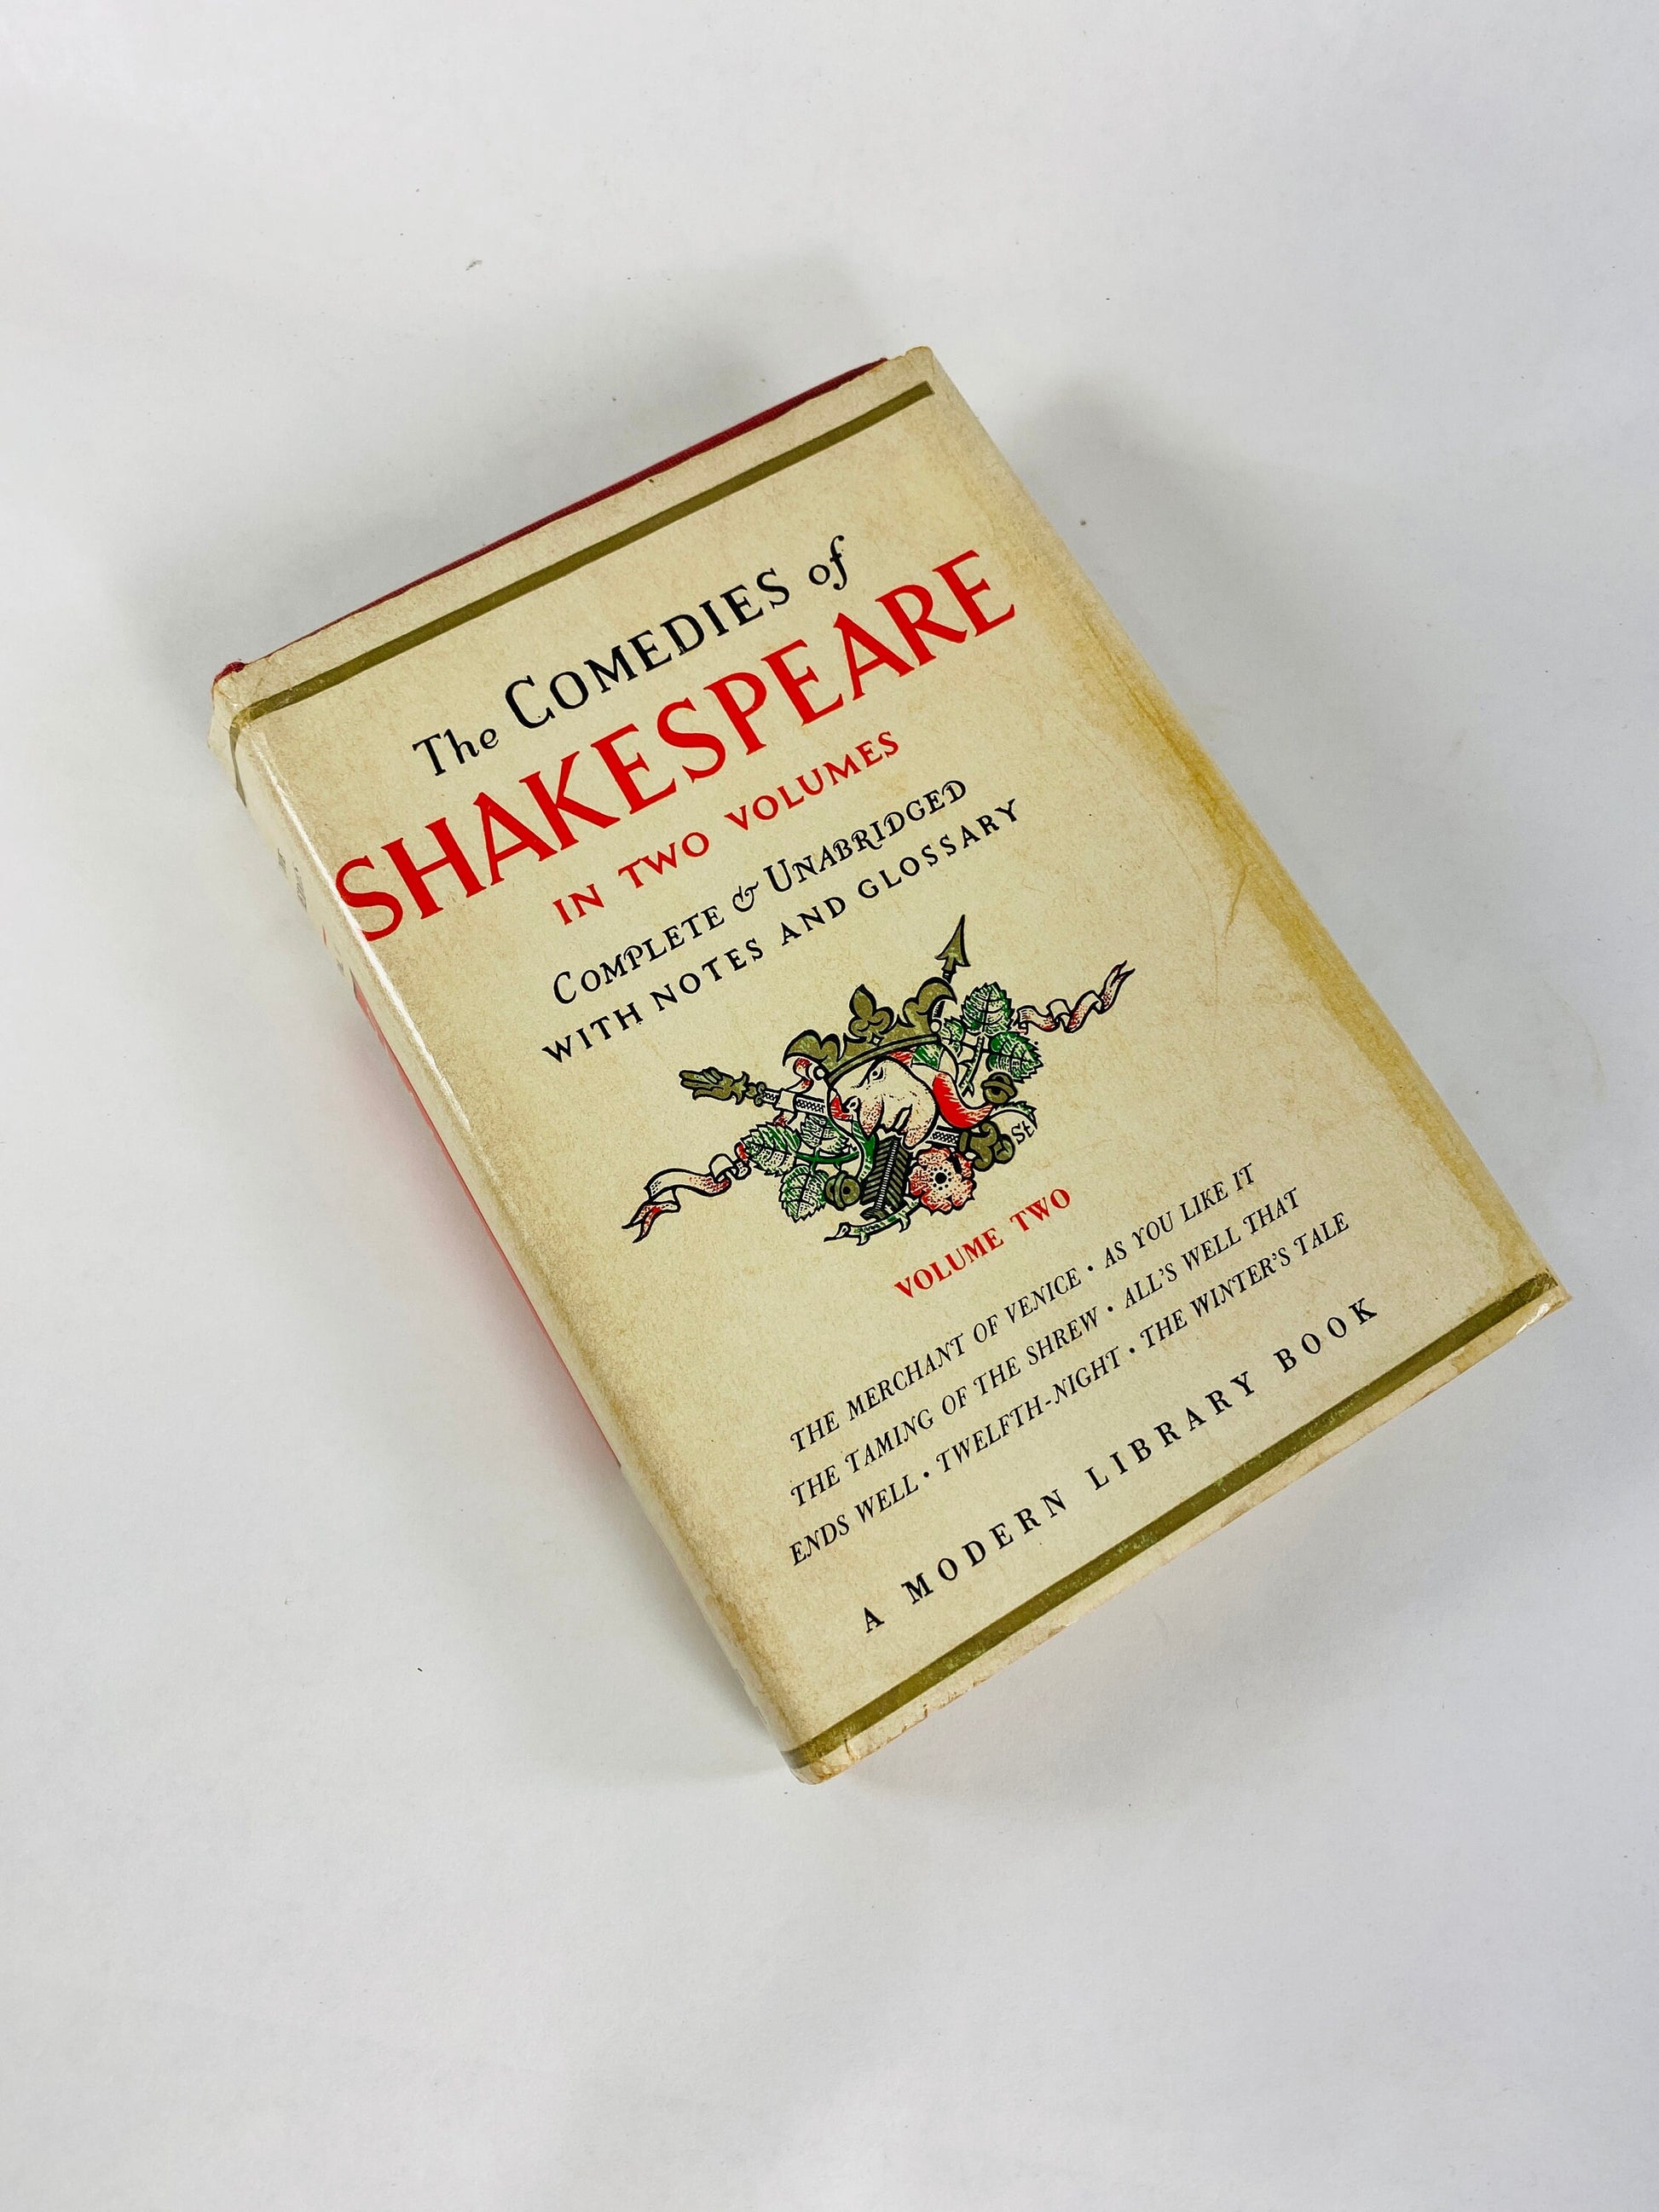 1952 Shakespeare Comedies Vintage Modern Library book with dust jacket Taming of the Shrew, Merry Wives of Windsor, Much Ado About Nothing